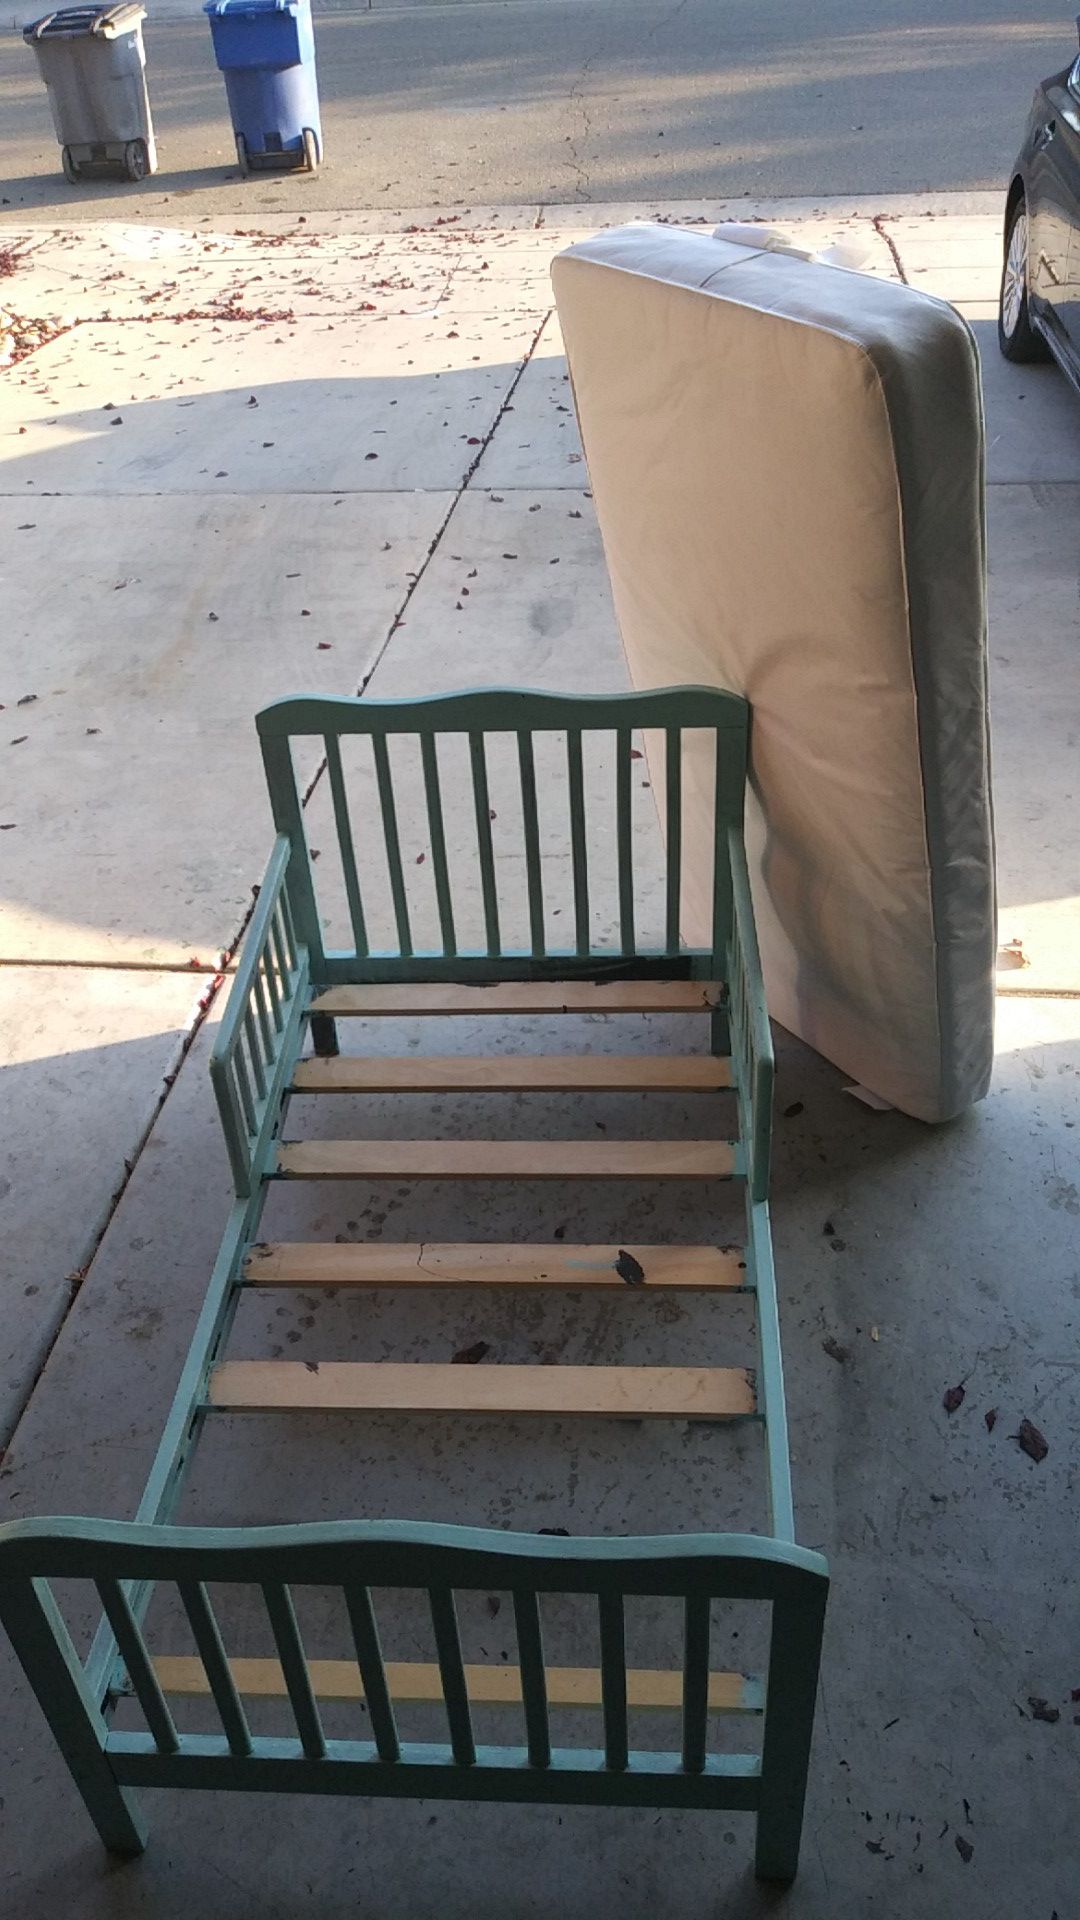 Toddler bed frame and mattressFREE FREE FREE